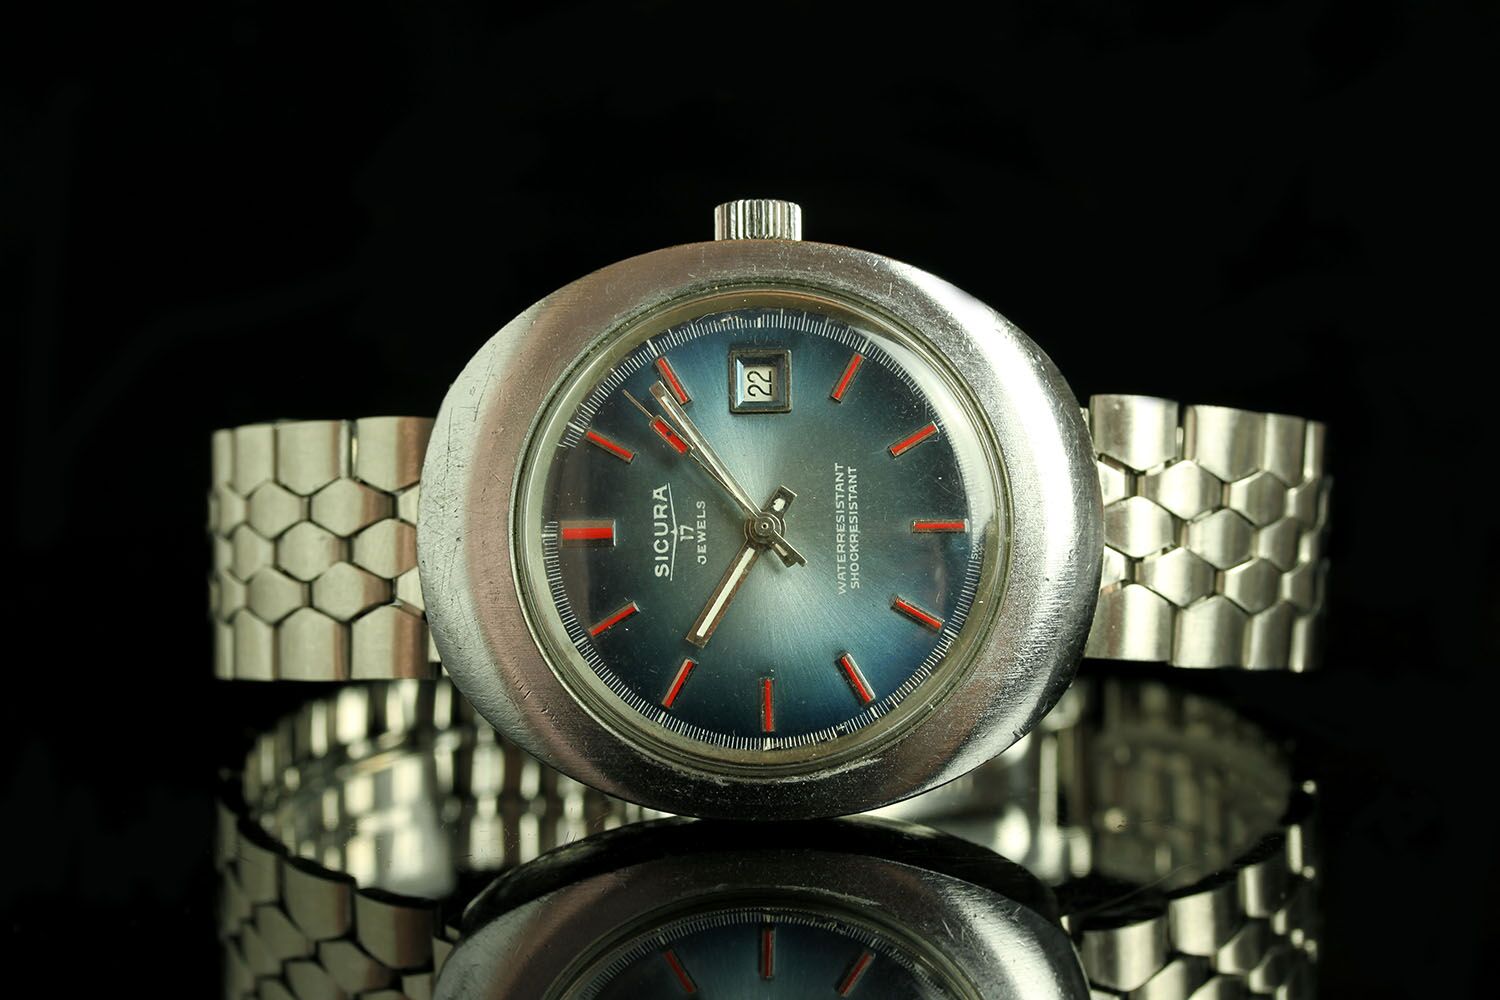 GENTLEMANS SICURA ,round, two tone blue dial with illuminated hands,red baton markers, 43x38mm steel